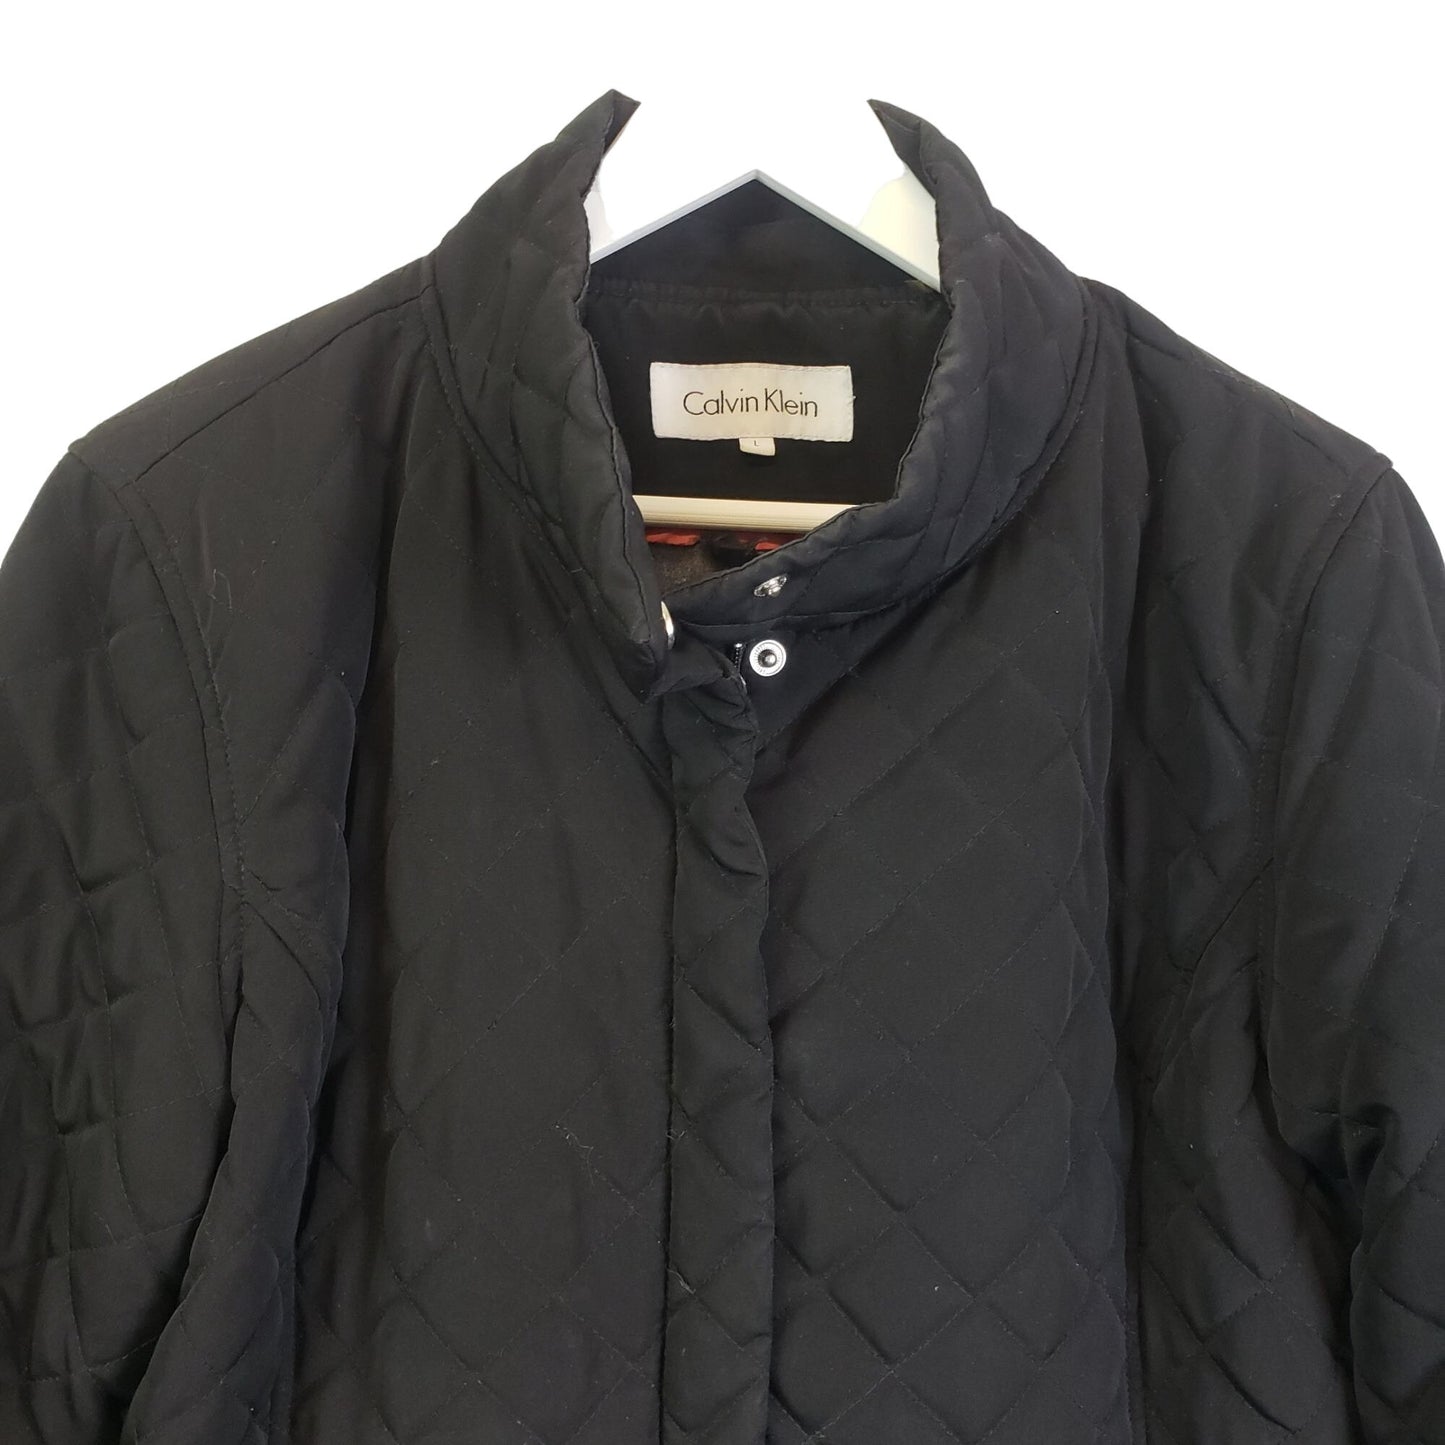 Calvin Klein Quilted Zip Front Jacket Size Large *Missing Hood*